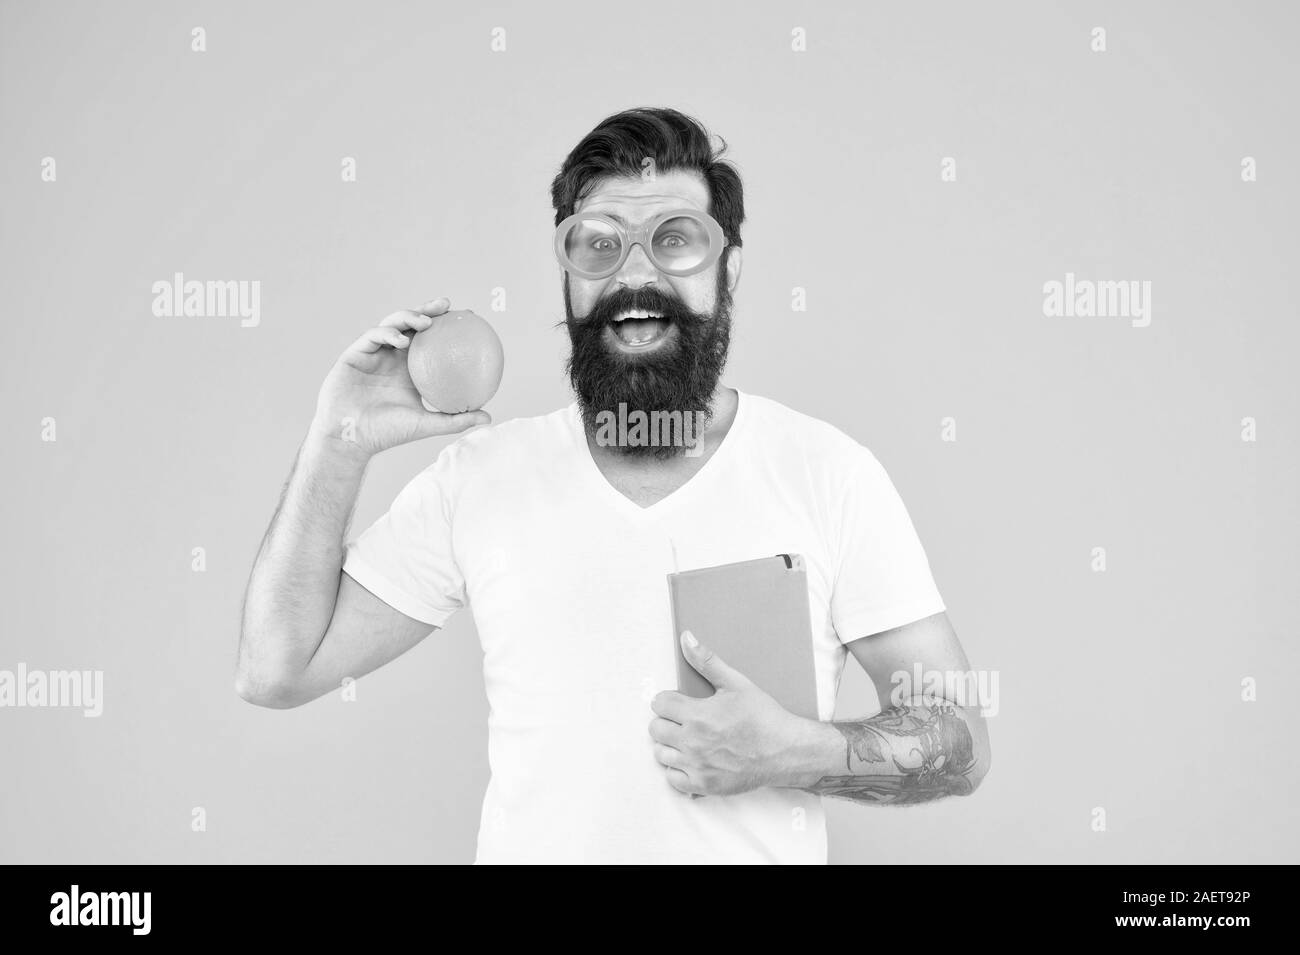 Nerd is the new cool. Bearded nerd man. Study nerd holding book and orange fruit on yellow background. Book nerd in fancy glasses choosing natural diet. Stock Photo